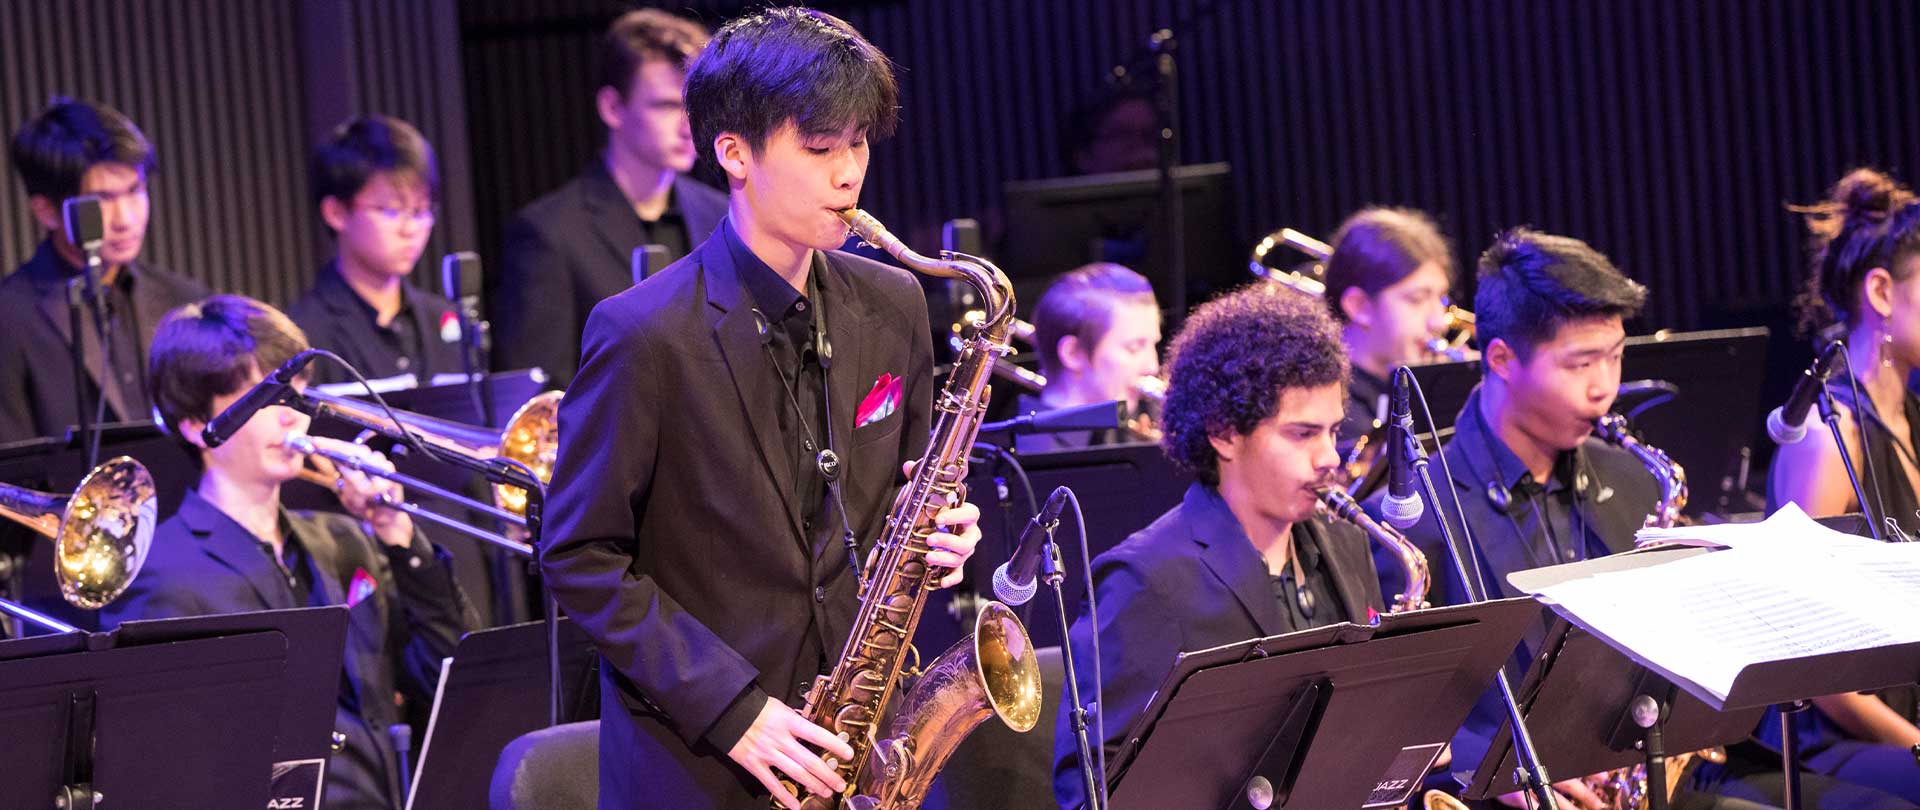 The SFJAZZ High School All-Stars performing in Miner Auditorium